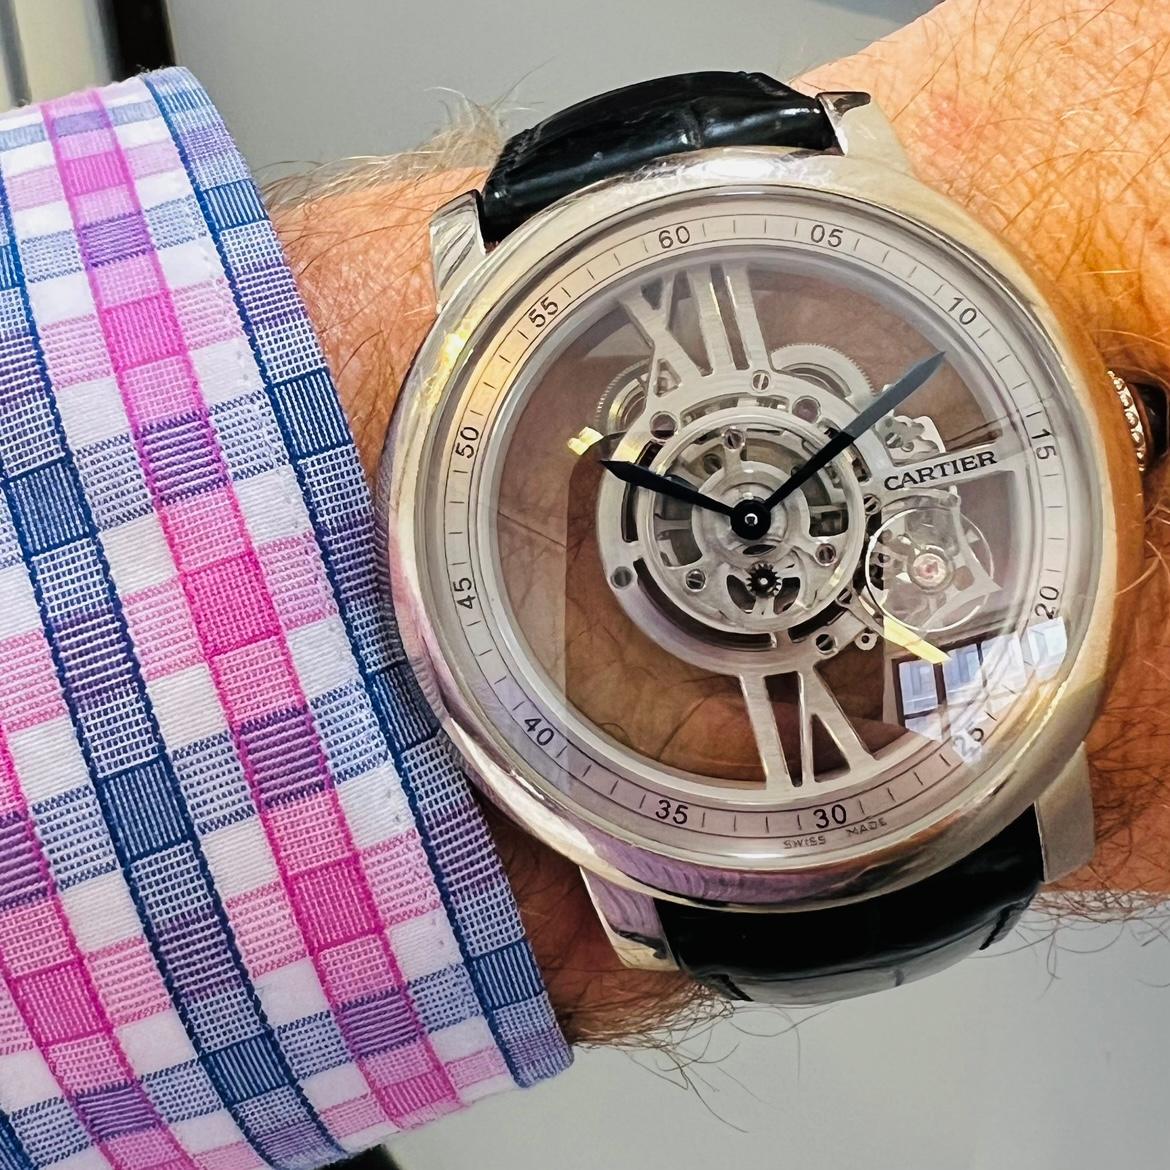 Remarkable Rotonde Astrotourbillon Skeleton Watch by Cartier In Excellent Condition For Sale In San Francisco, CA